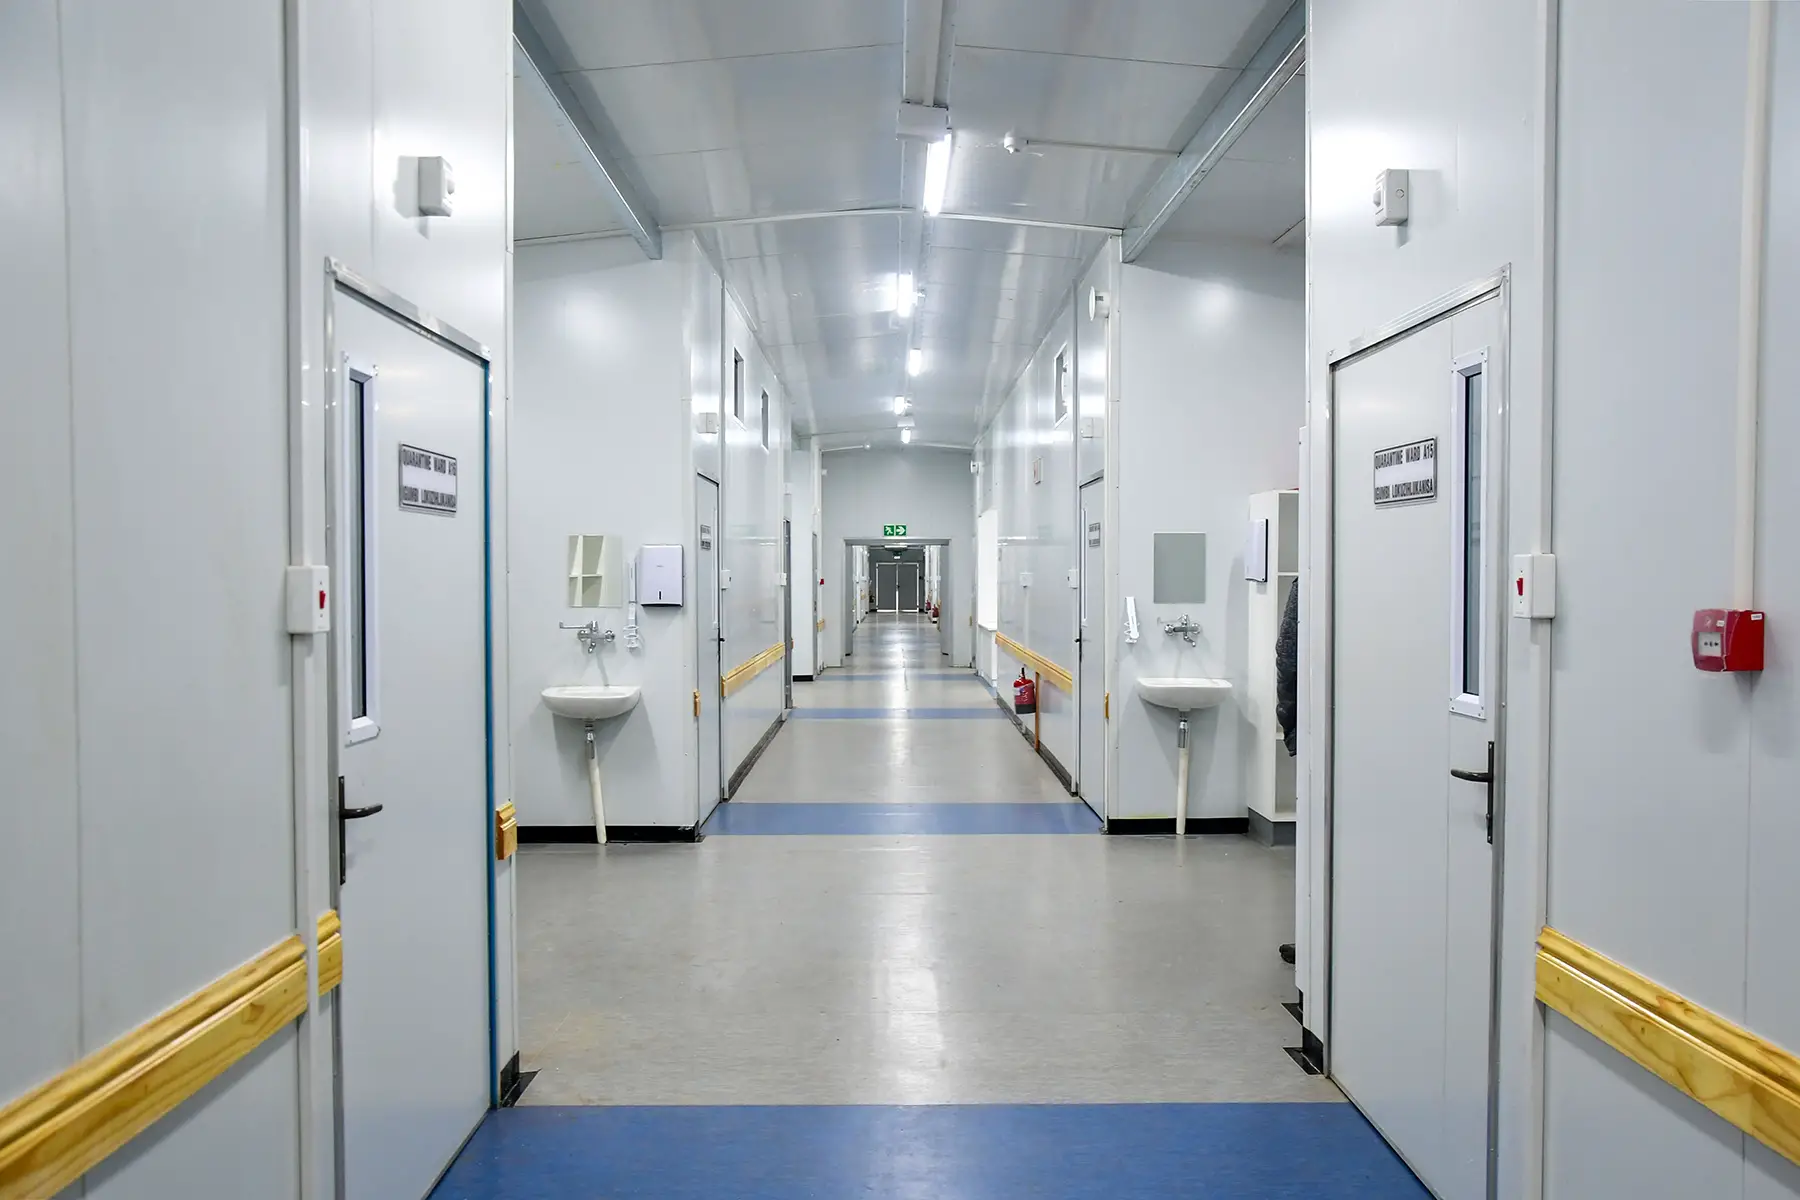 A corridor at the Clairwood Hospital in Durban, South Africa